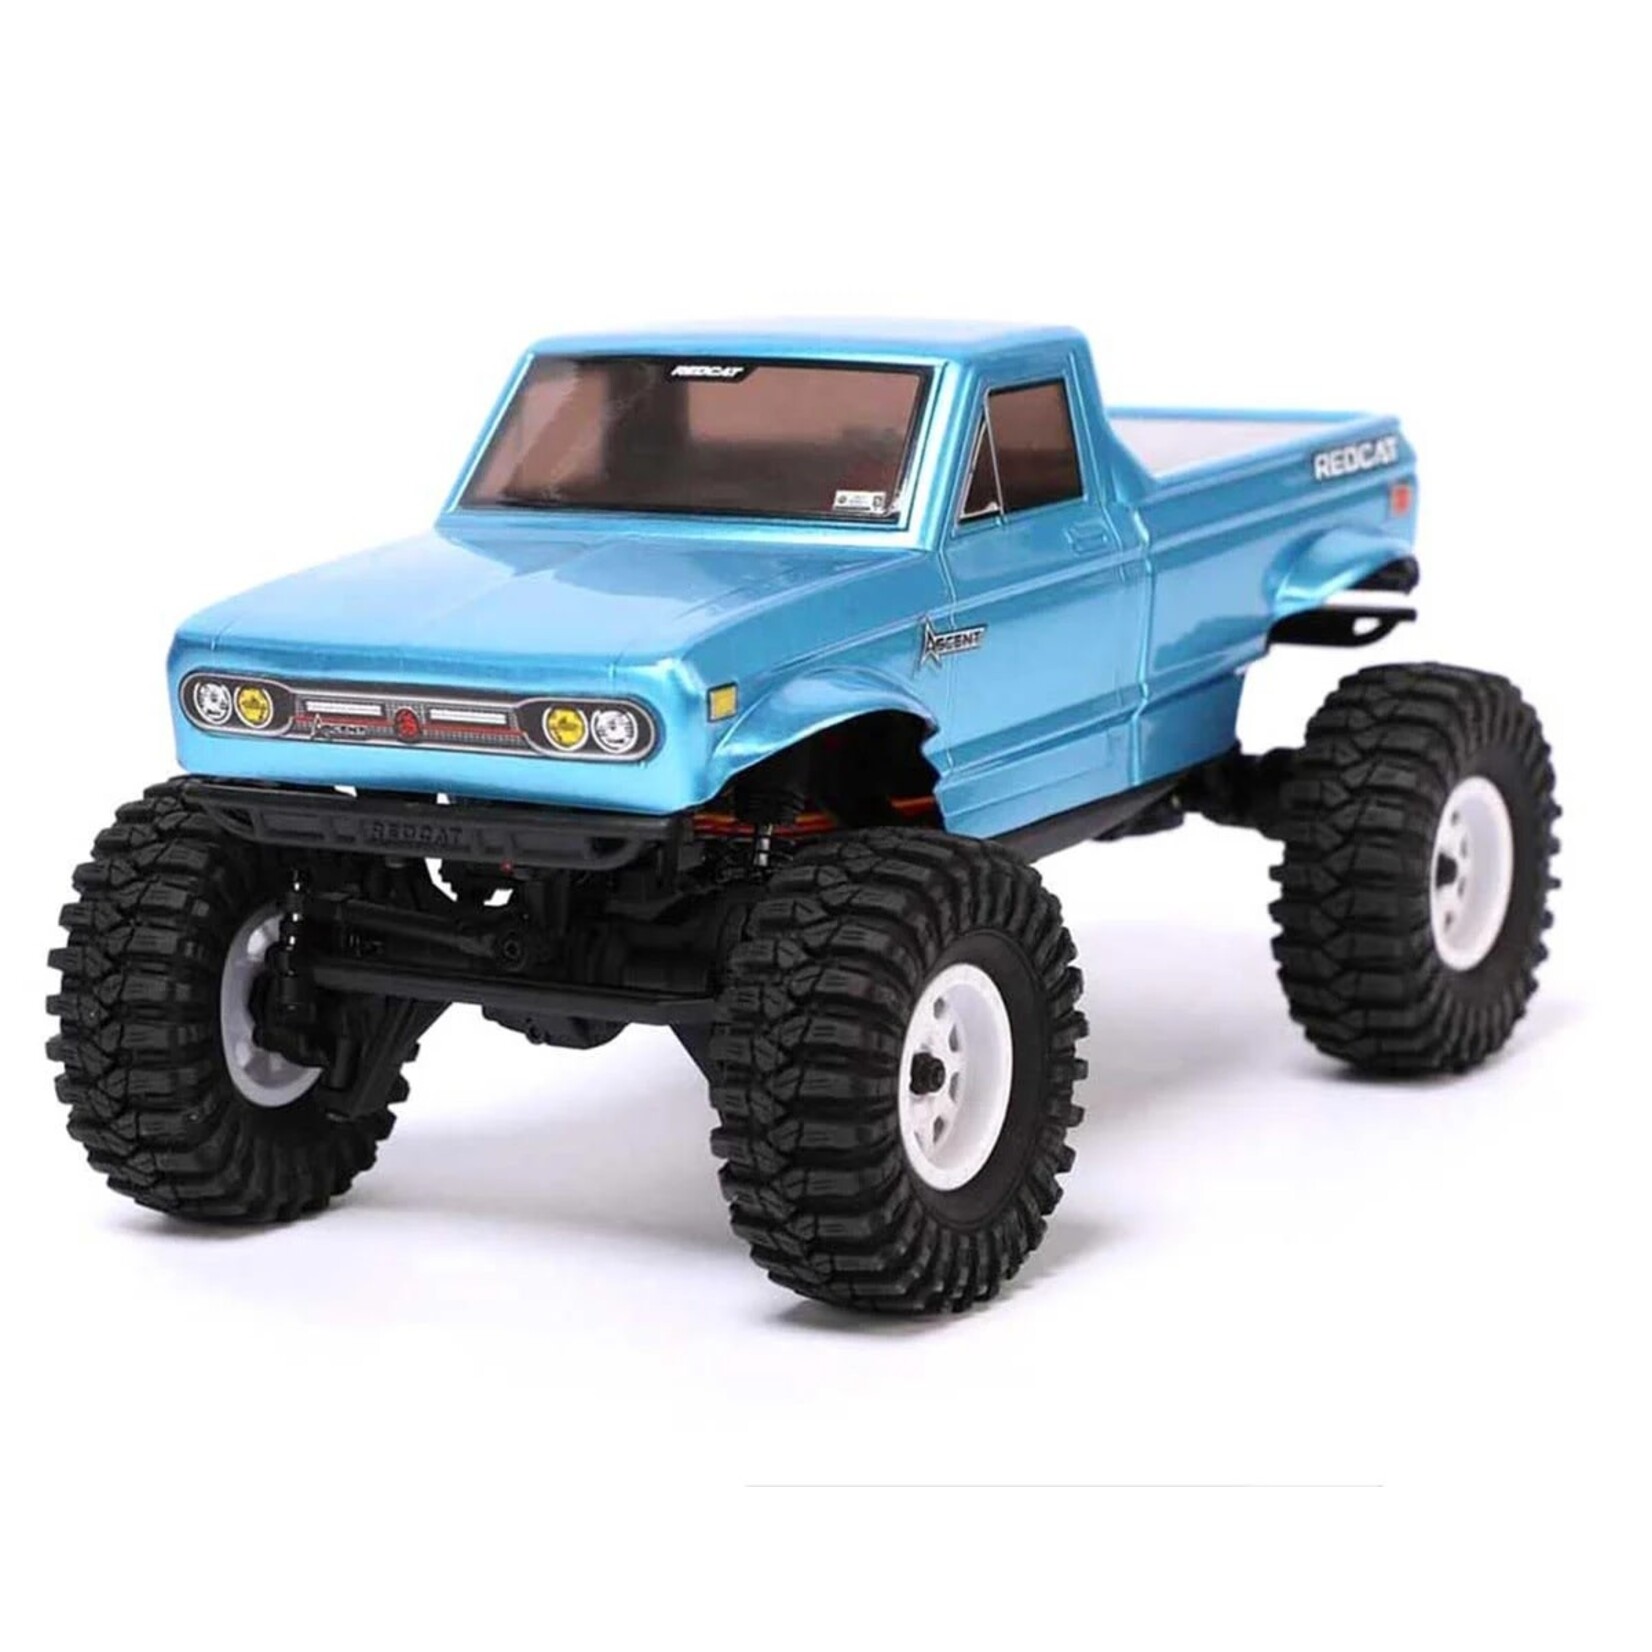 Redcat Racing Redcat Ascent-18 1/18 4WD RTR Rock Crawler (Blue) w/2.4GHz Radio, Battery & Charger #RER31319